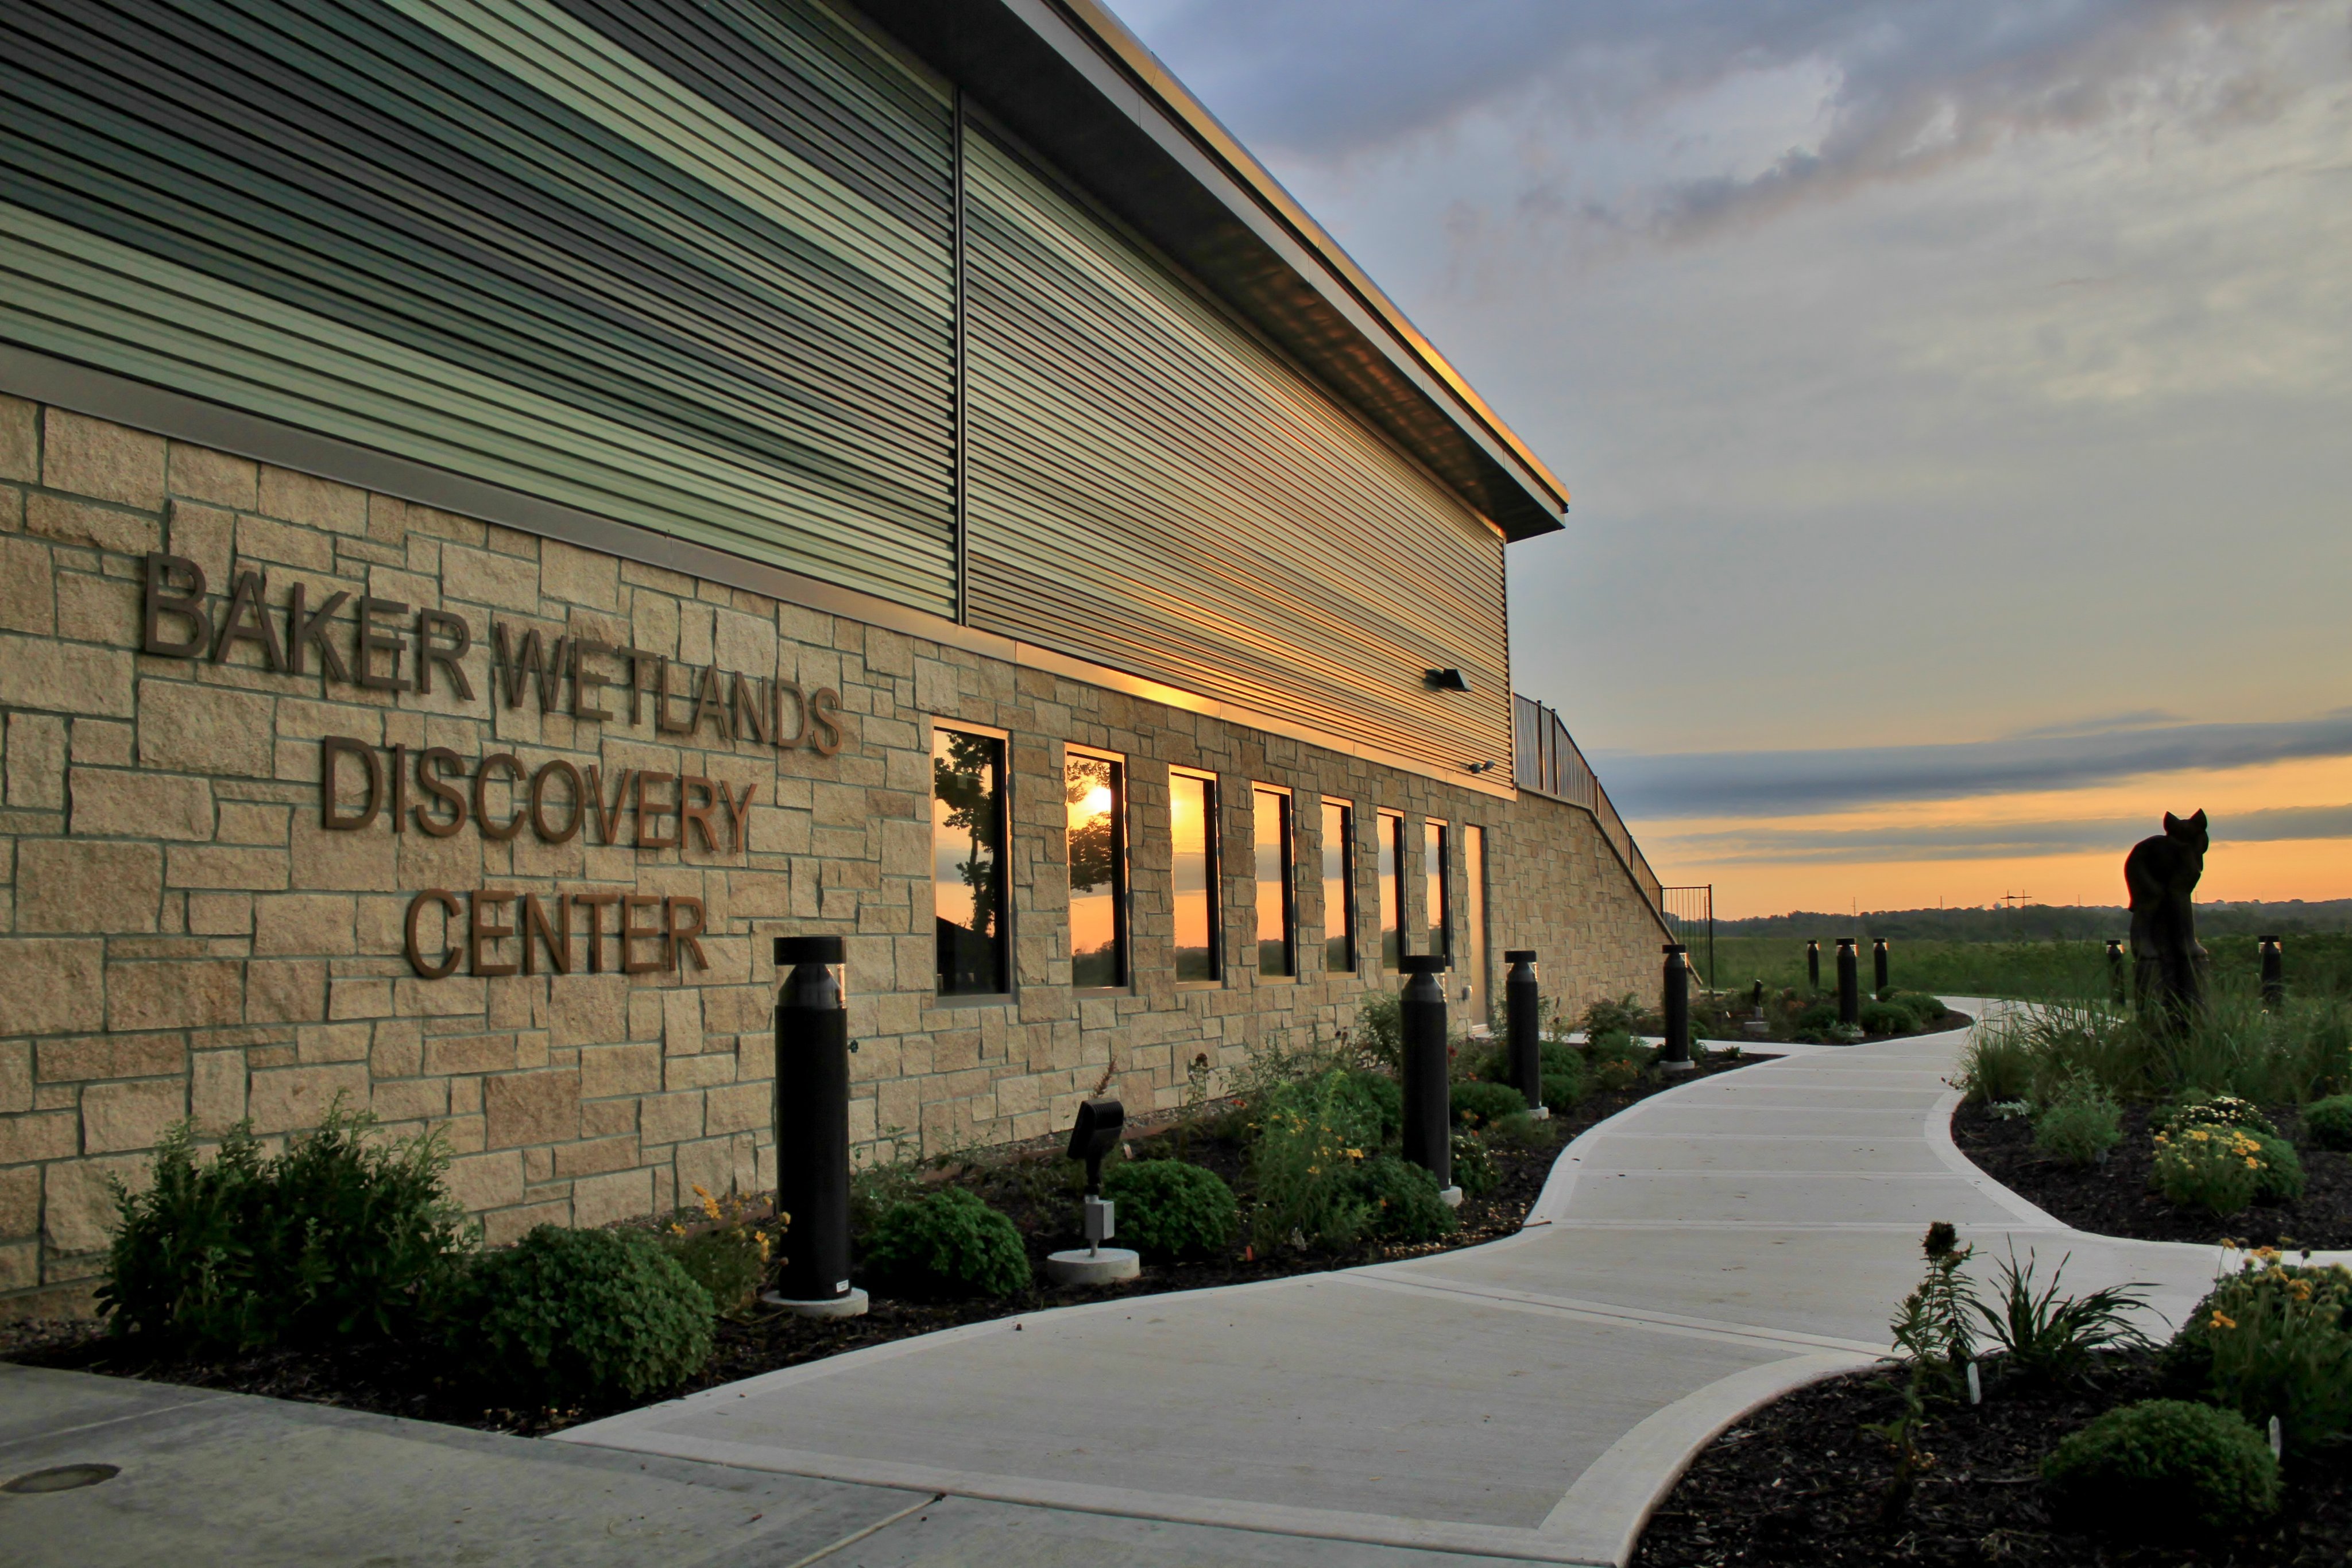 The Baker Wetlands Discovery Center features live animals, informational displays, year-round programming, and 11 miles of hiking and biking trails.